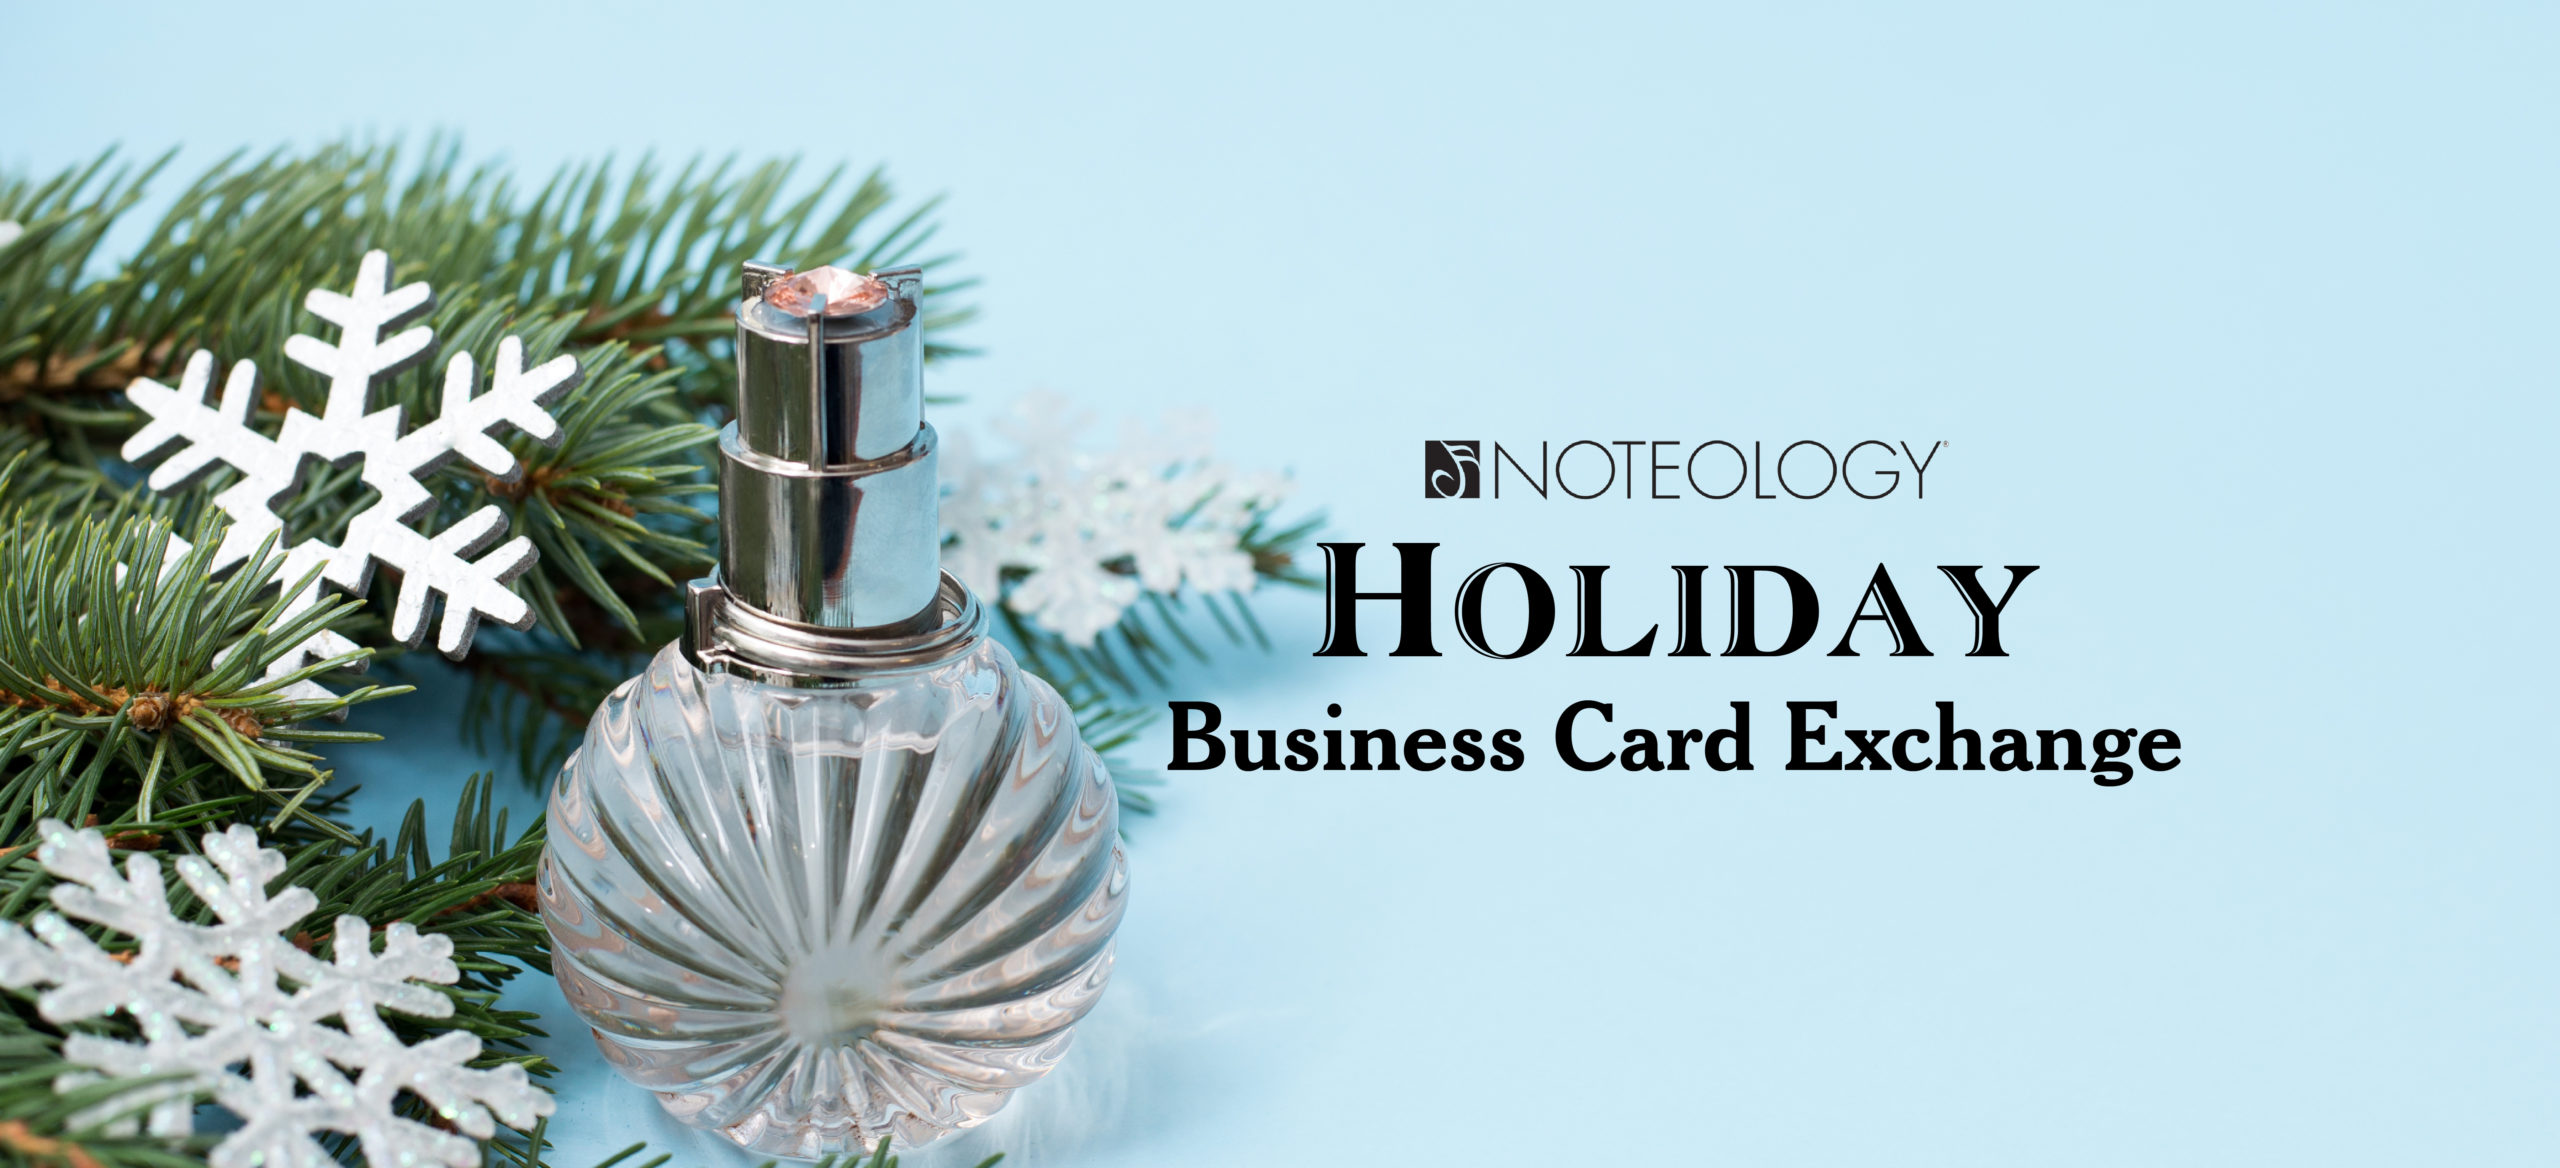 Holiday Business Card Exchange at Noteology